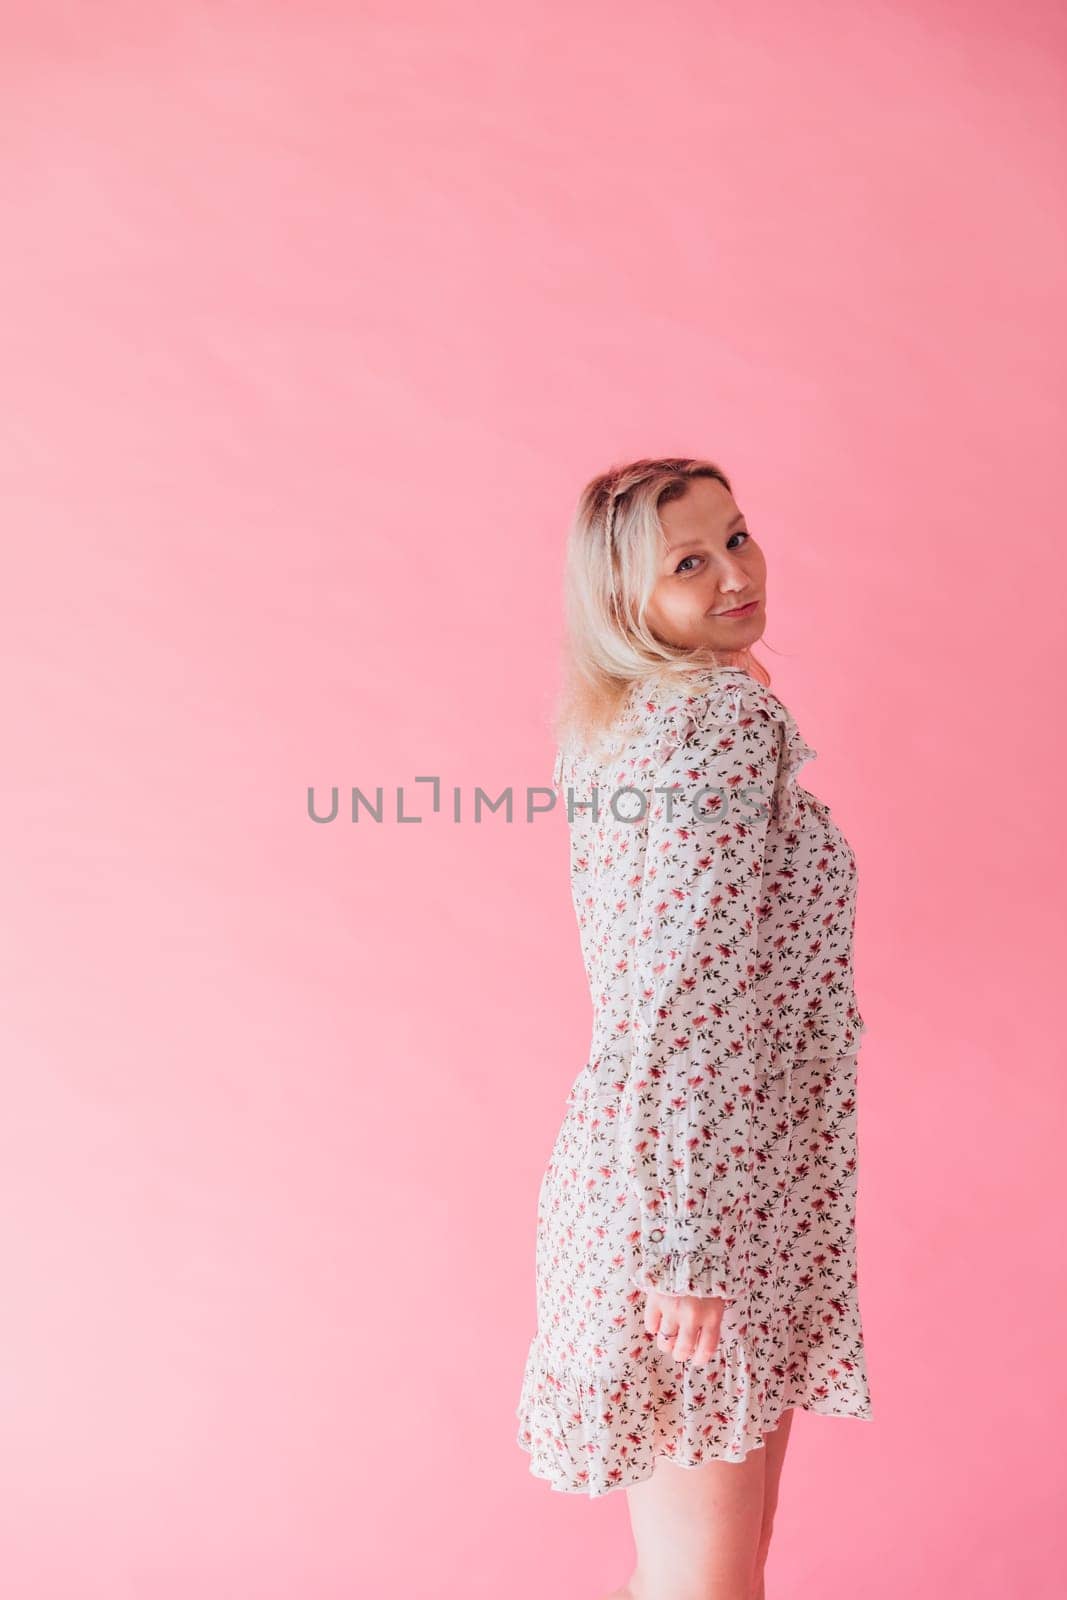 Woman smiling and dancing to music on pink background by Simakov